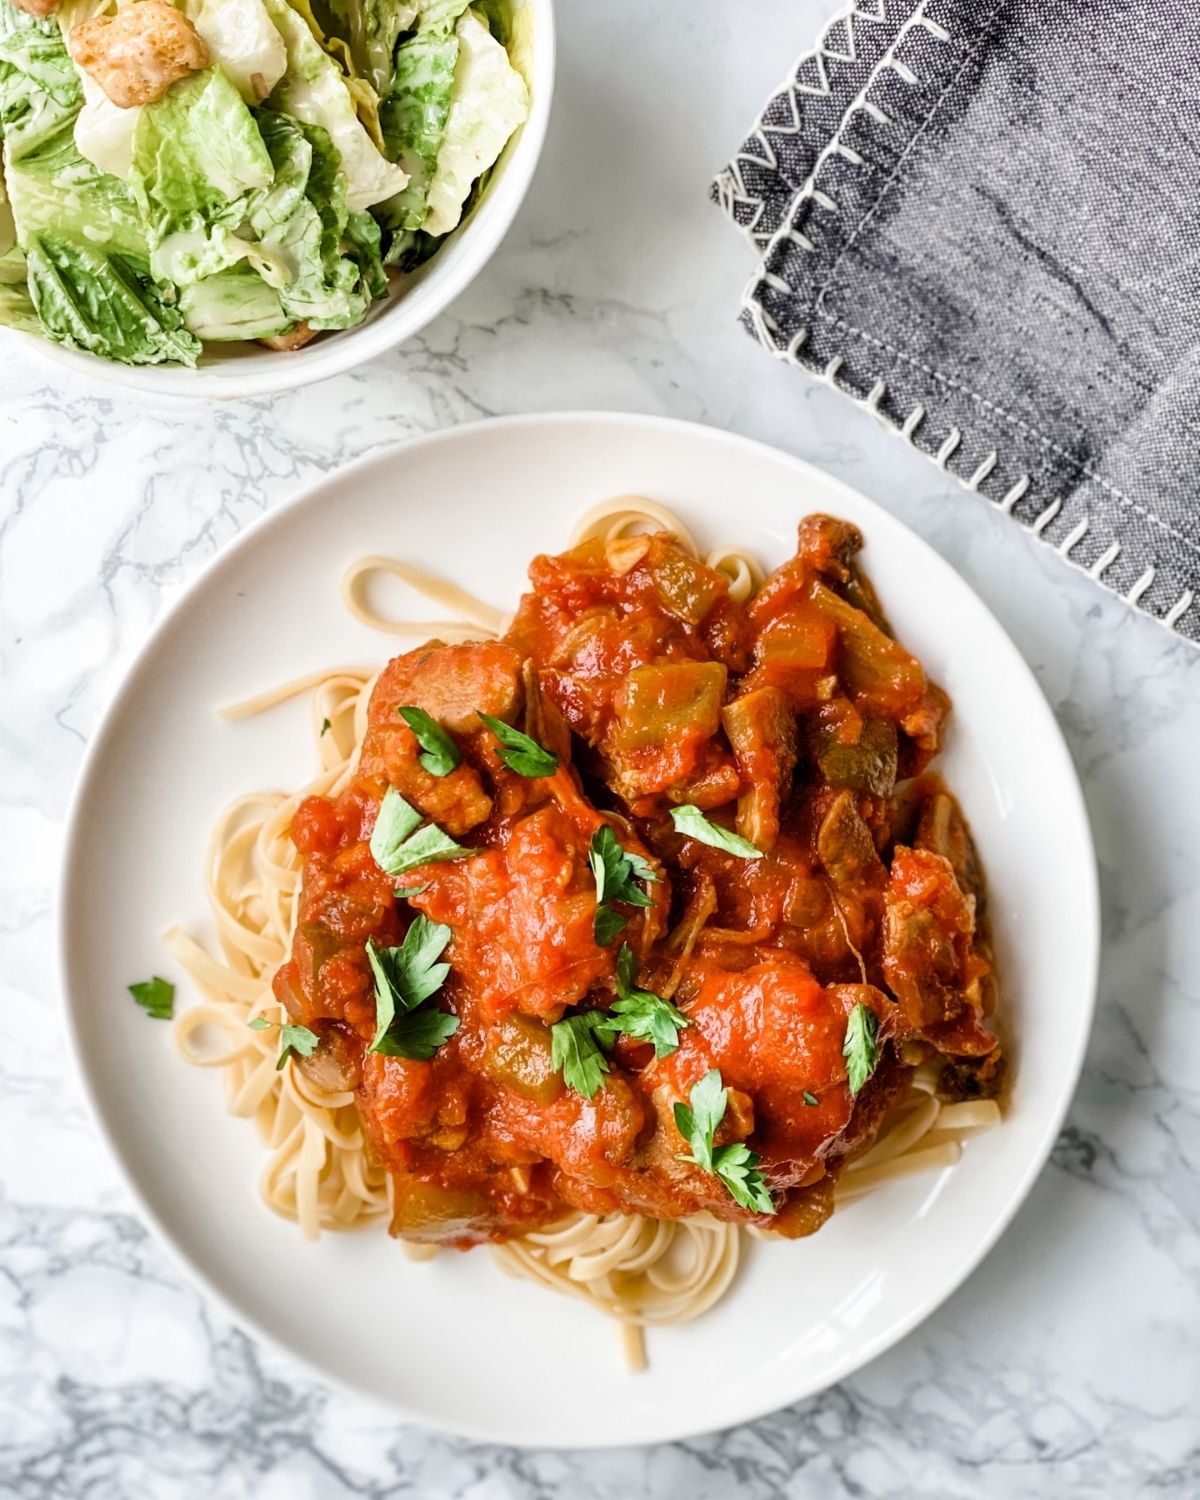 chicken cacciatore on a plate with gluten free pasta and side salad.